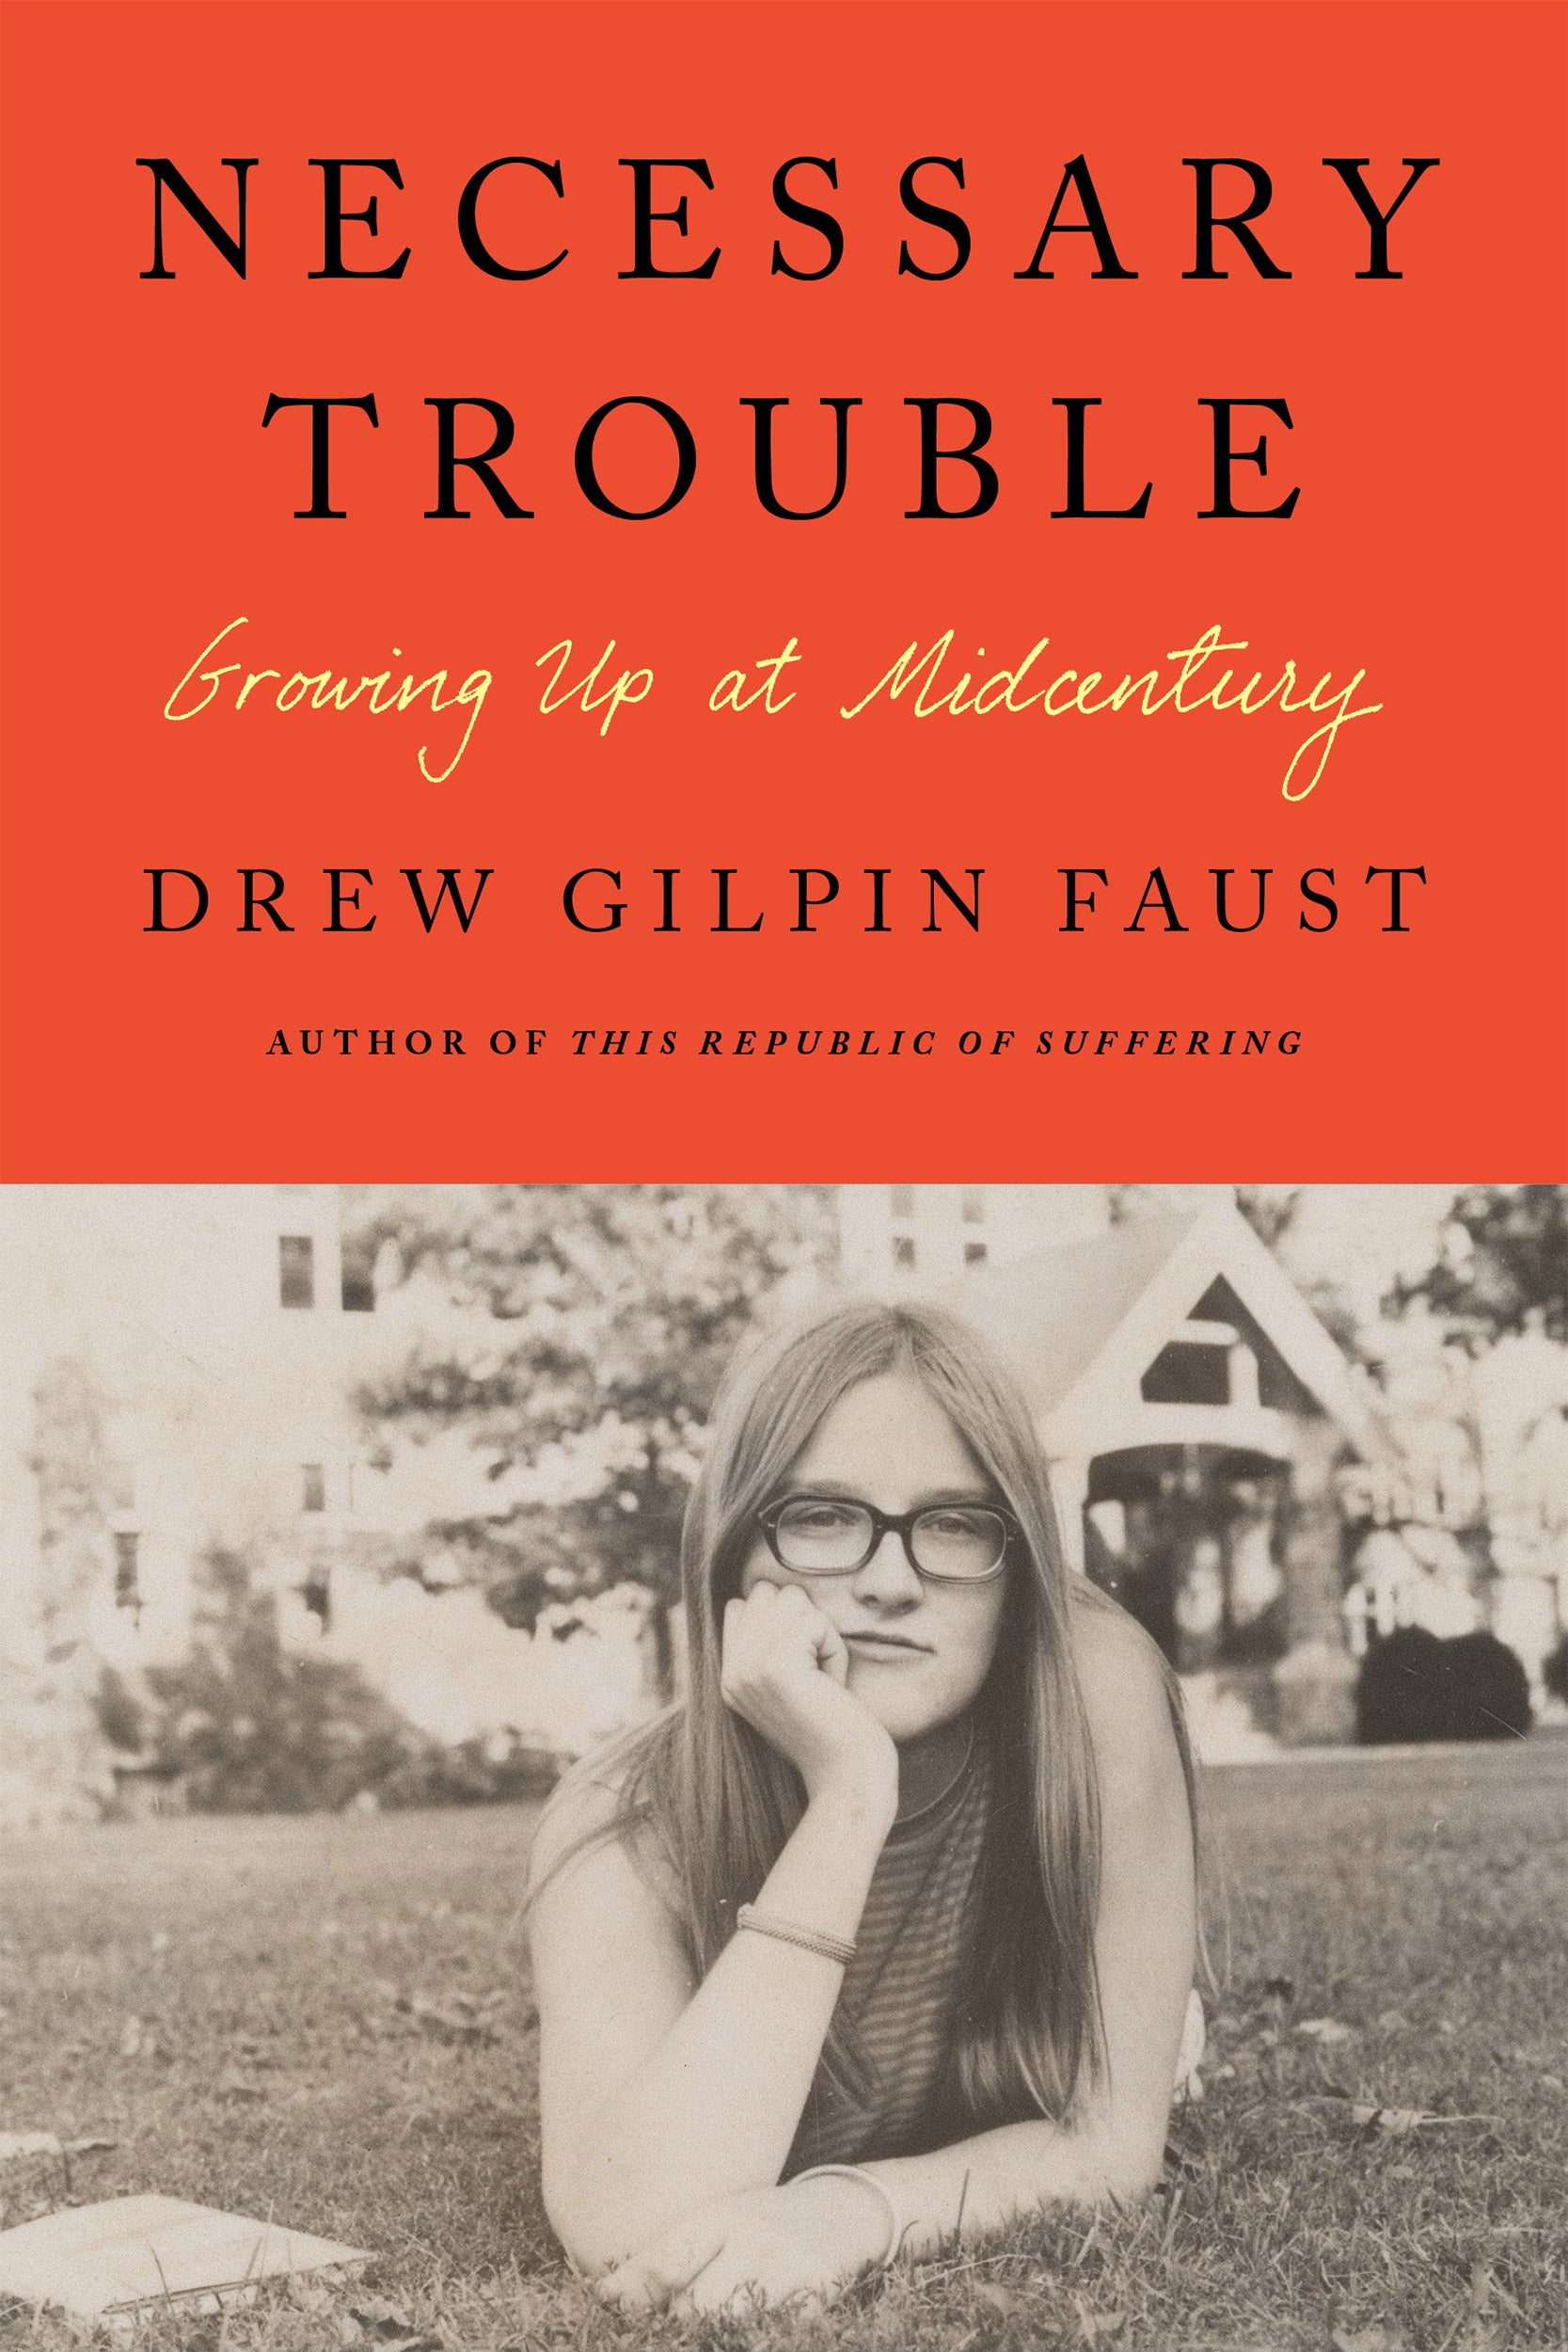 Cover of Drew Faust's book Necessary Trouble.